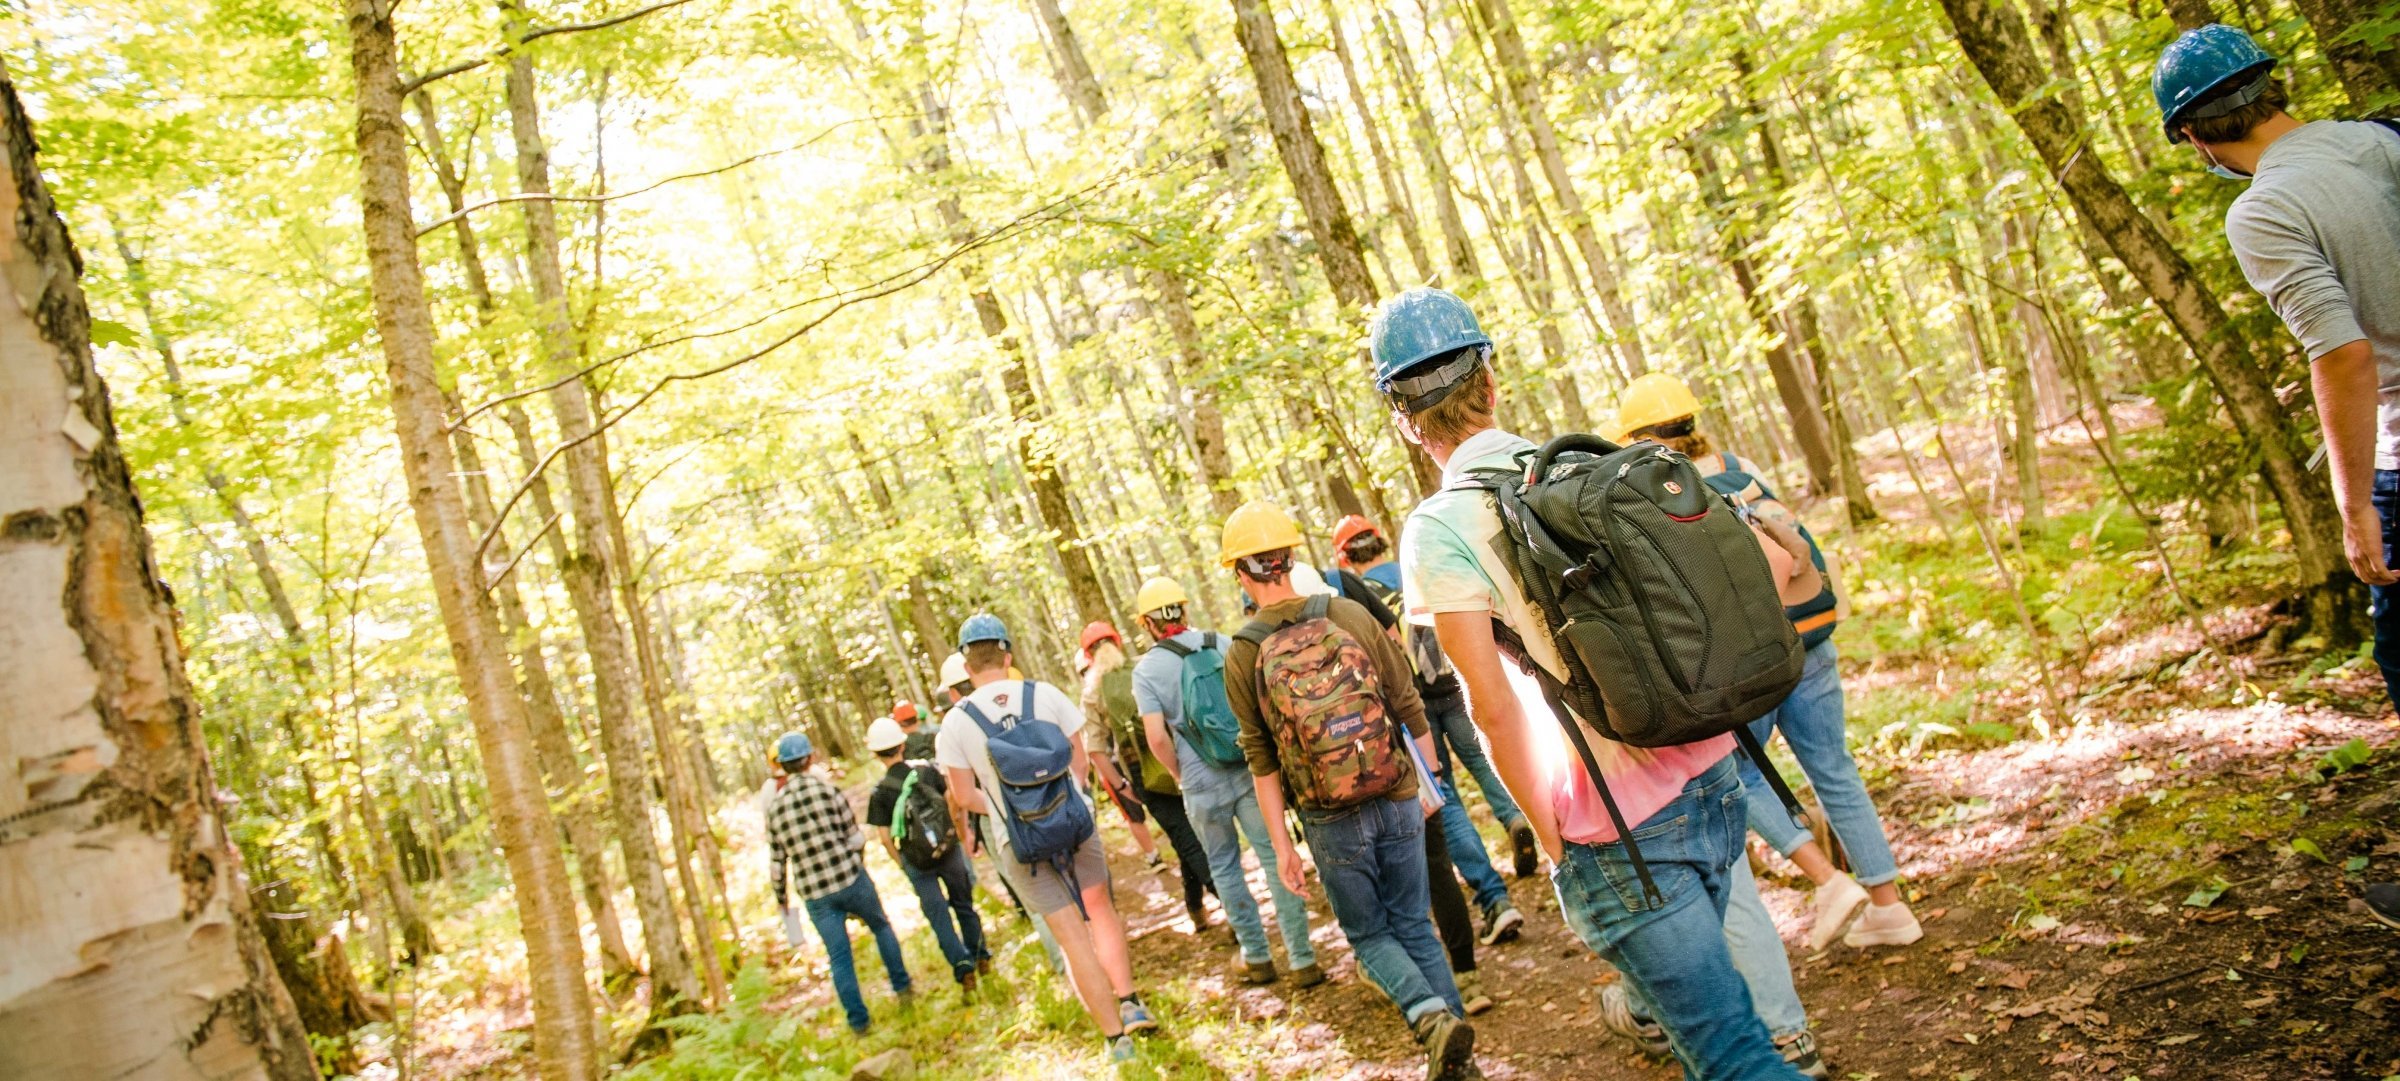 Natural Resources Management students walking in the forest with hardhats and backpacks